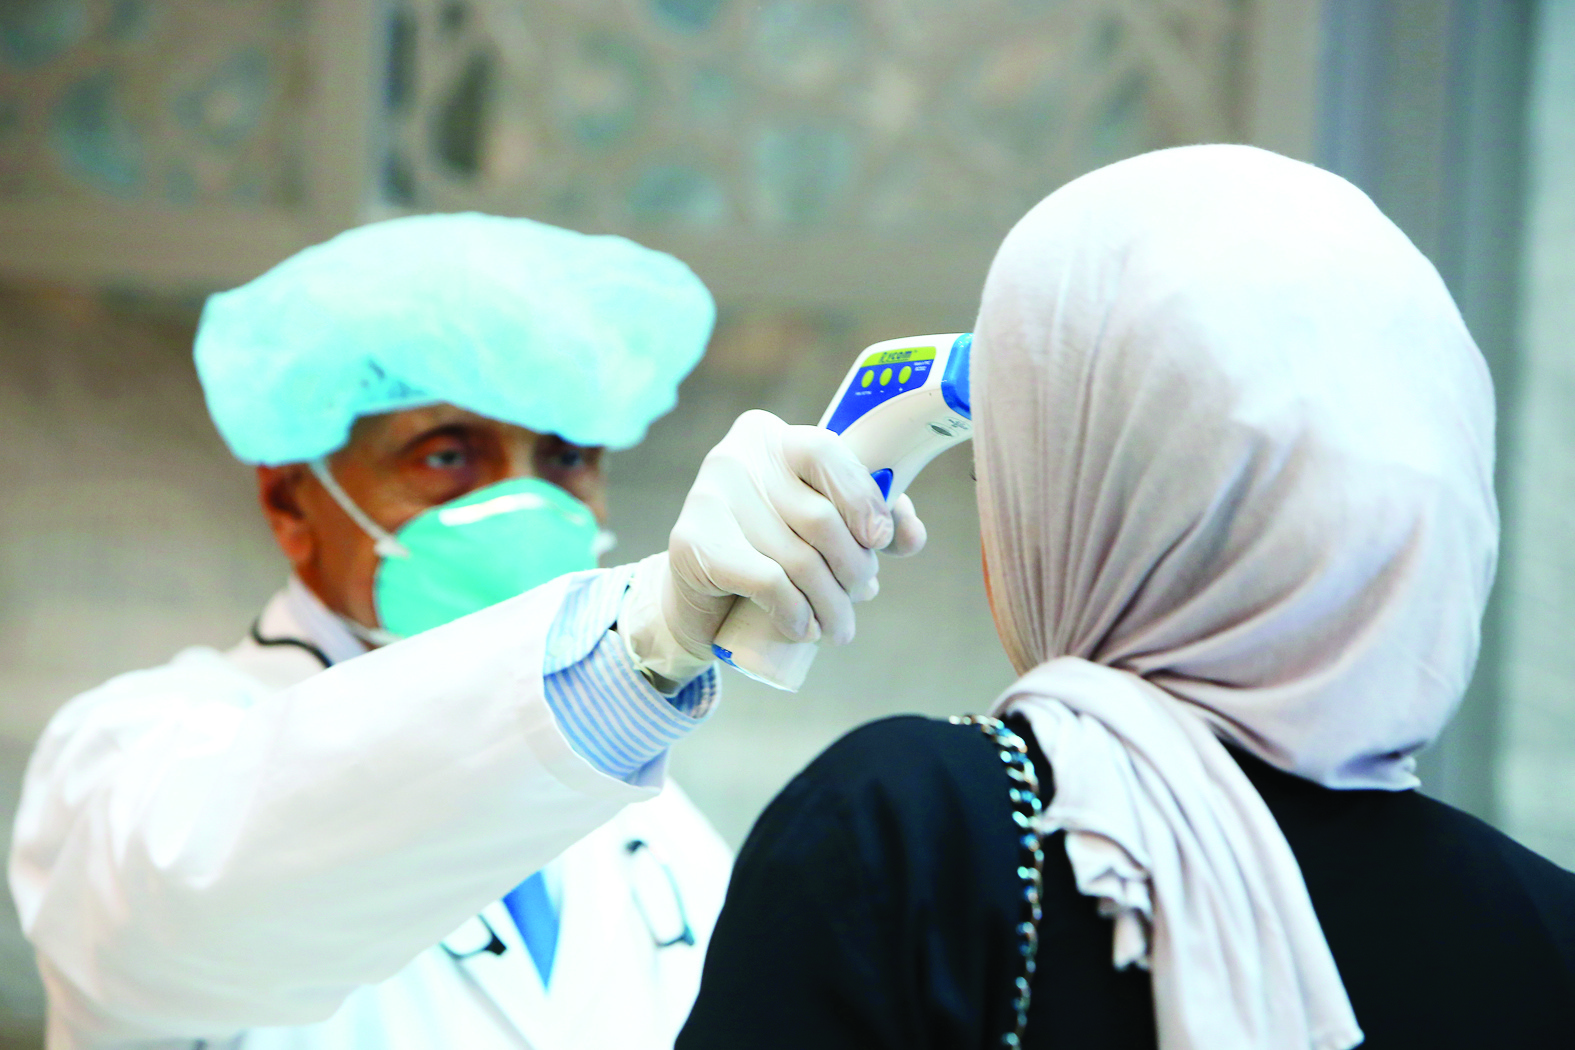 Kuwait health ministry workers scan employee of the ministries complex, as she arrive to her work, in Kuwait City on March 3, 2020.